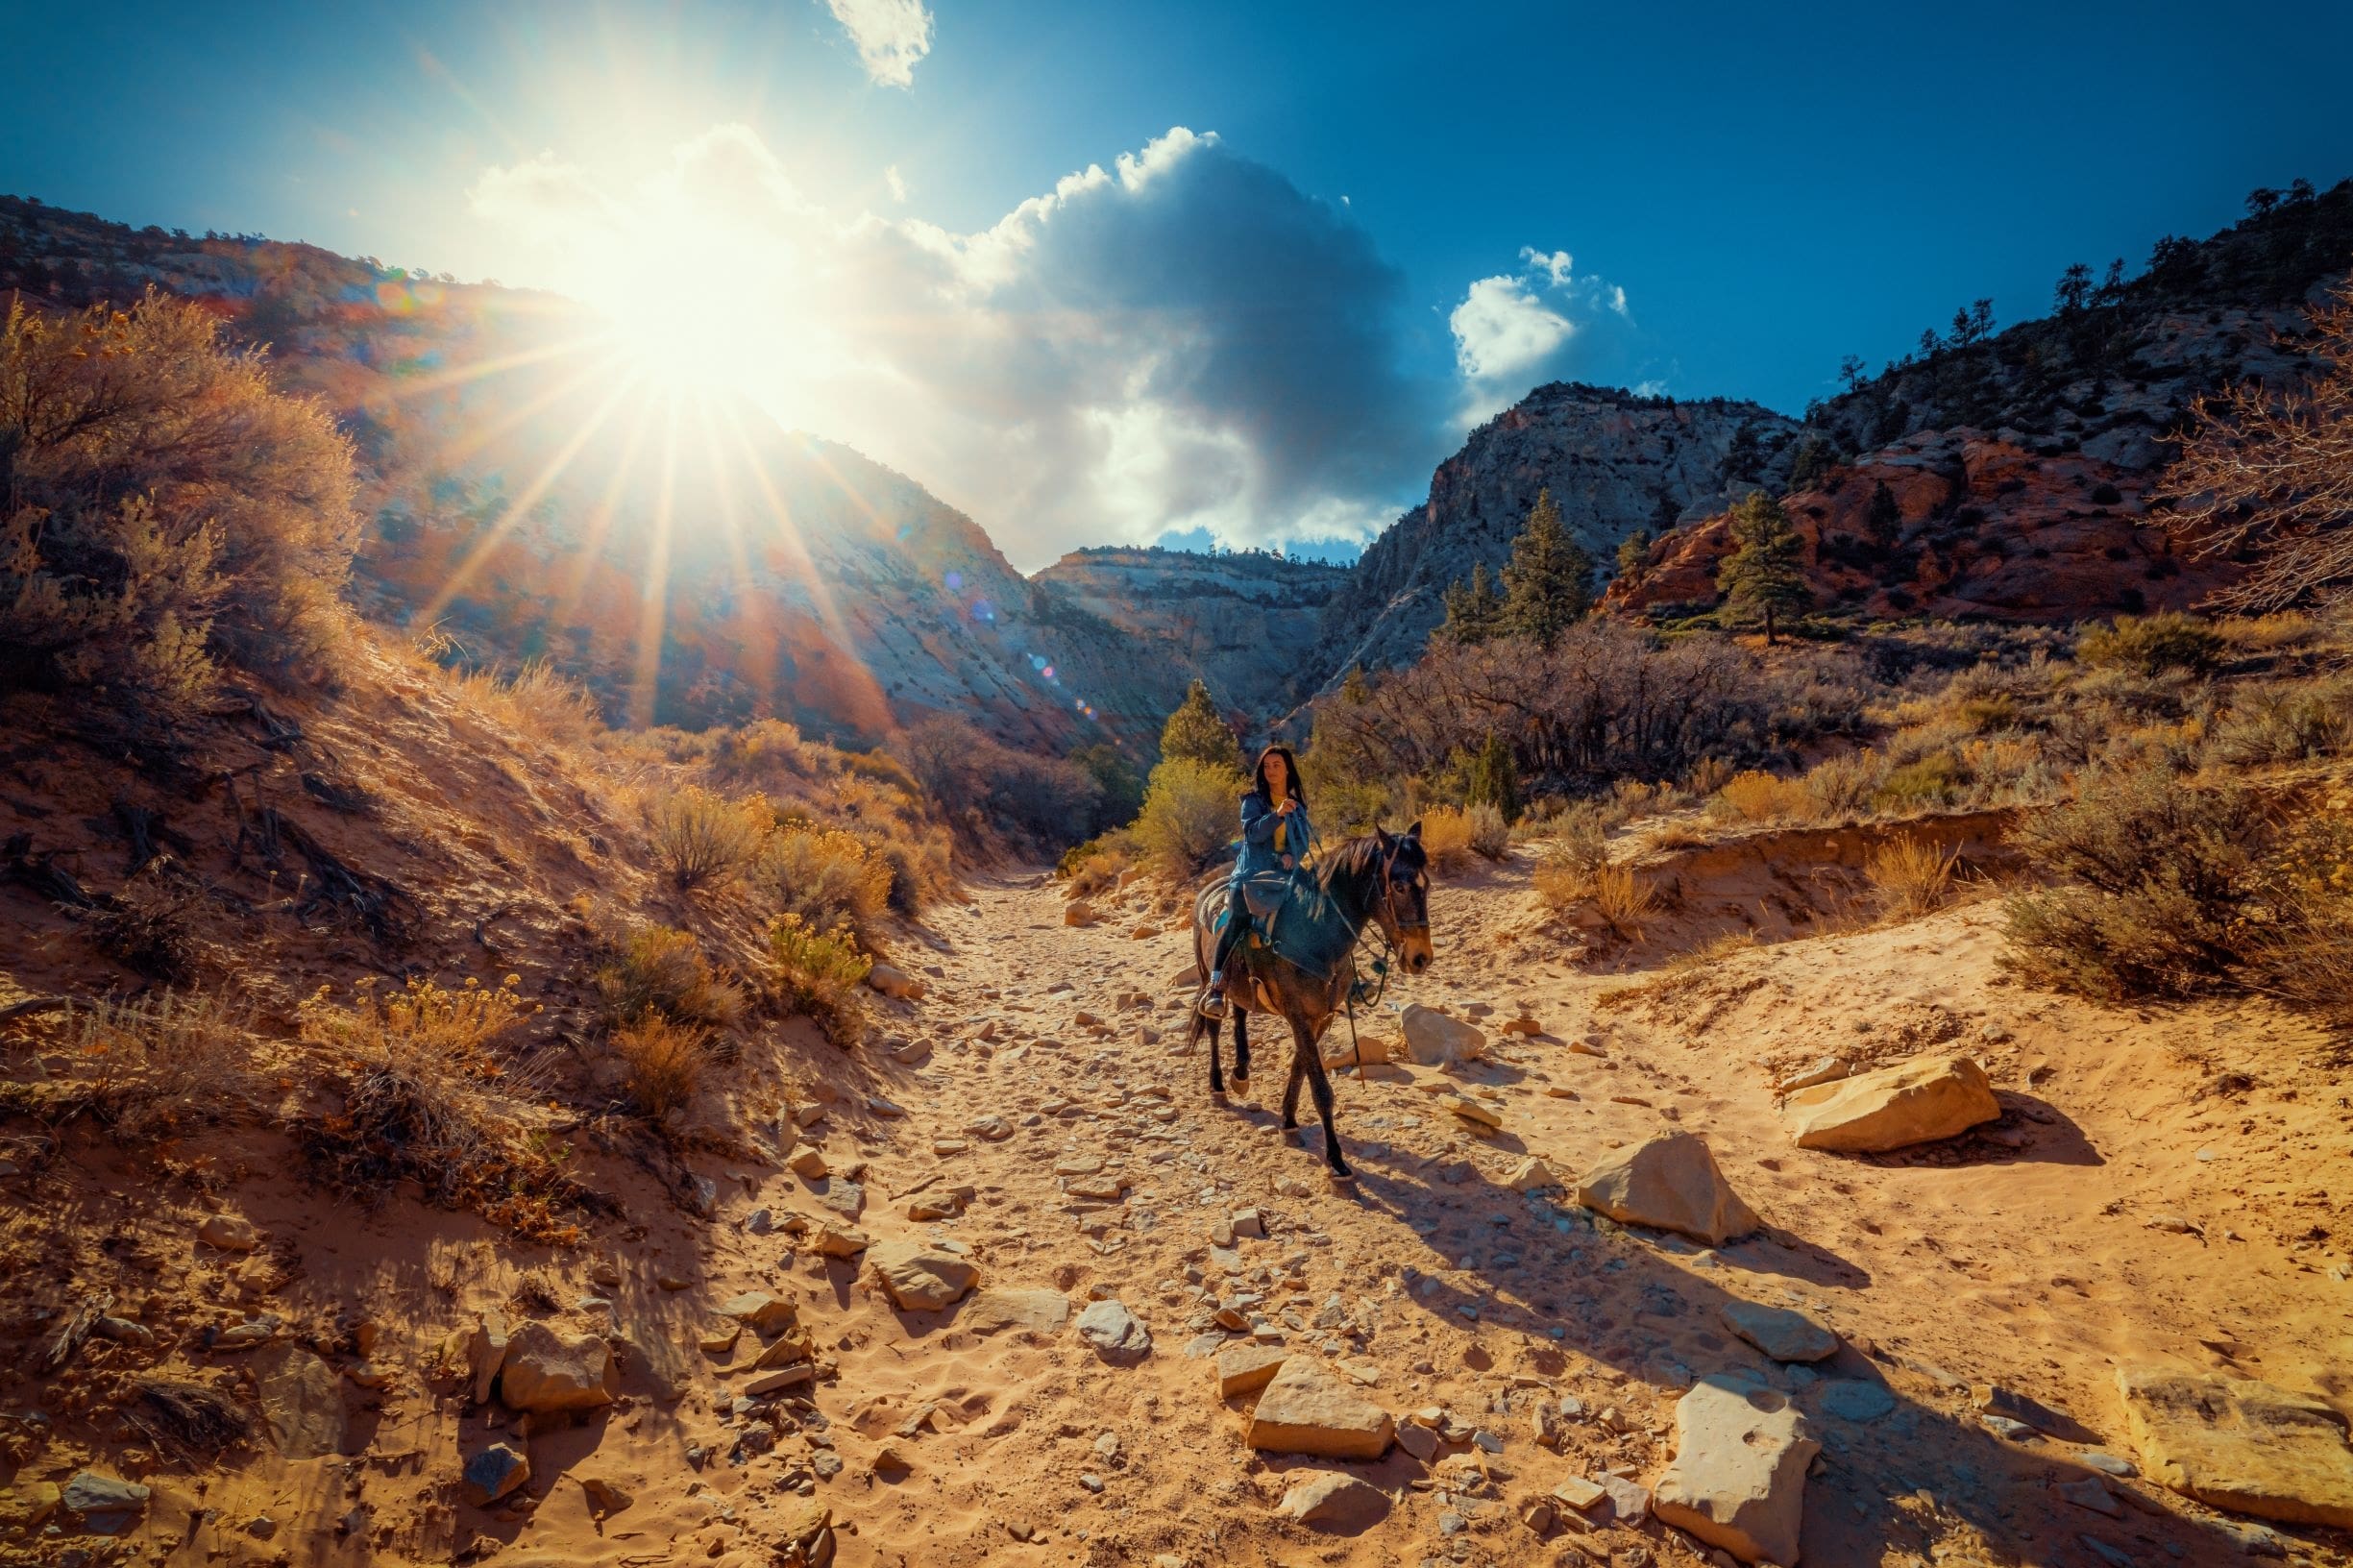 Featured image for “White Sands Sunset Horseback Ride”